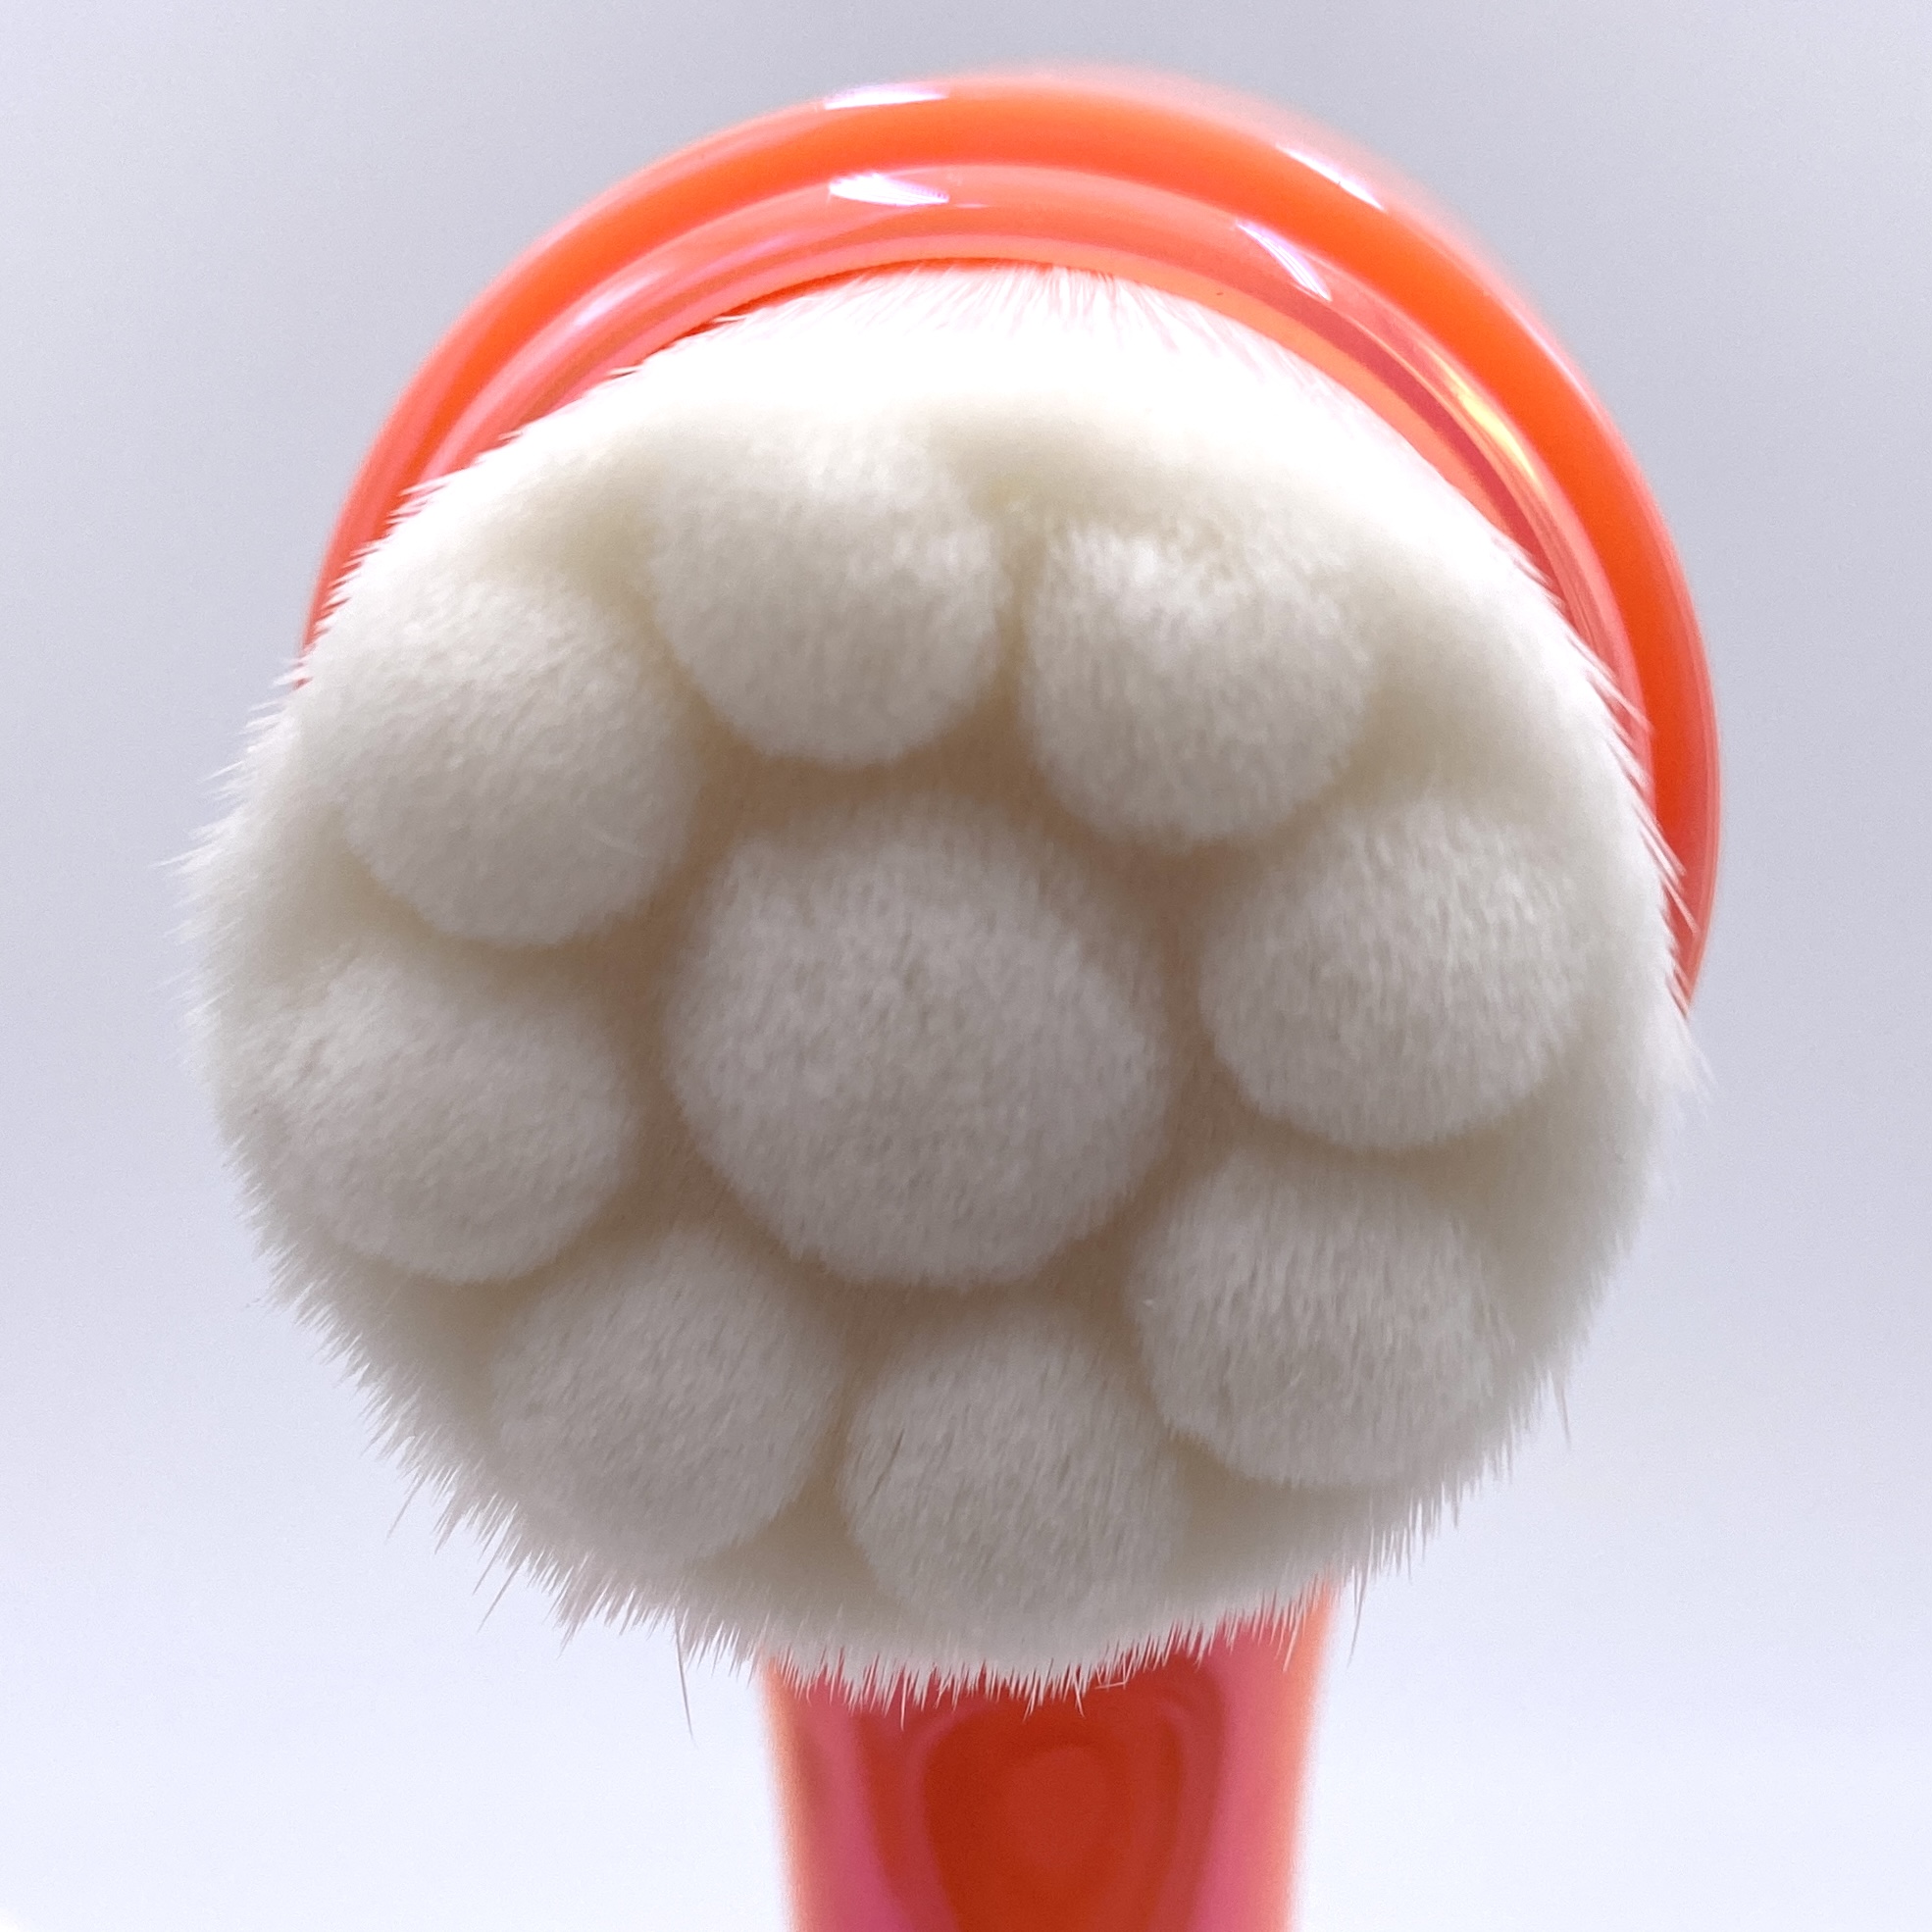 Almost Famous Cleanse It 2-in-1 Exfoliator Brush Close-Up1 for The Beem Box January 2021